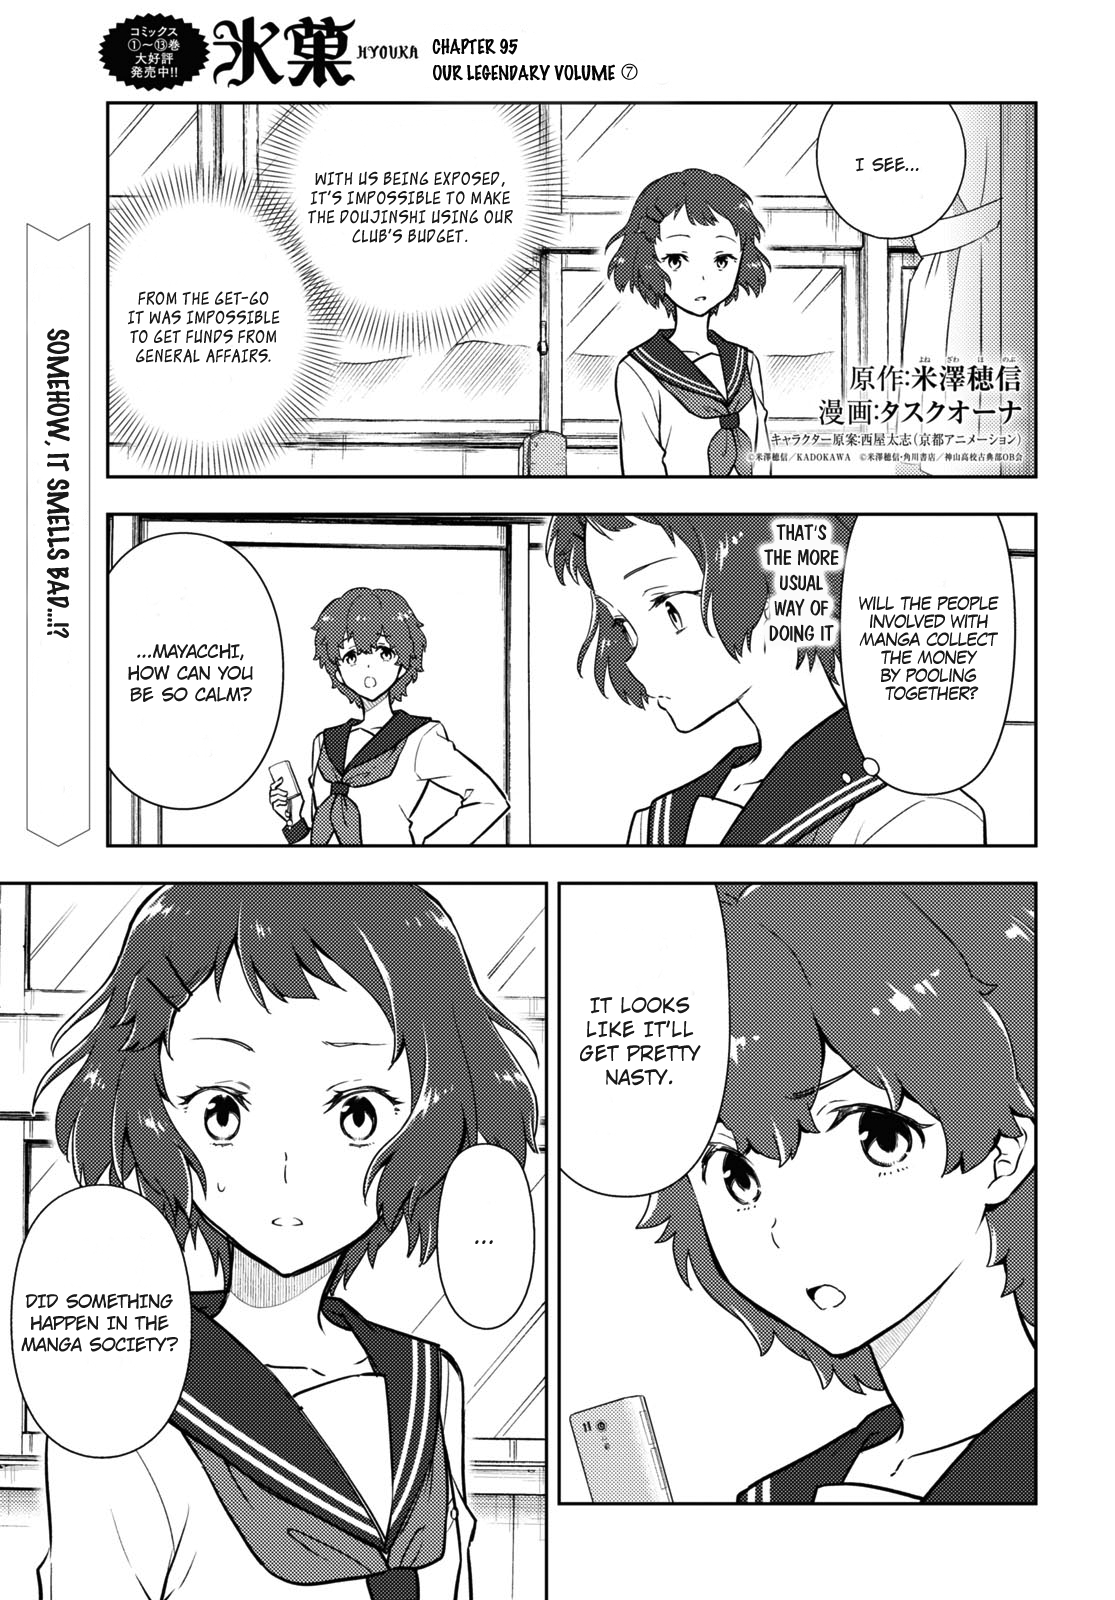 Hyouka Chapter 95: Our Legendary Volume ⑦ - Picture 1